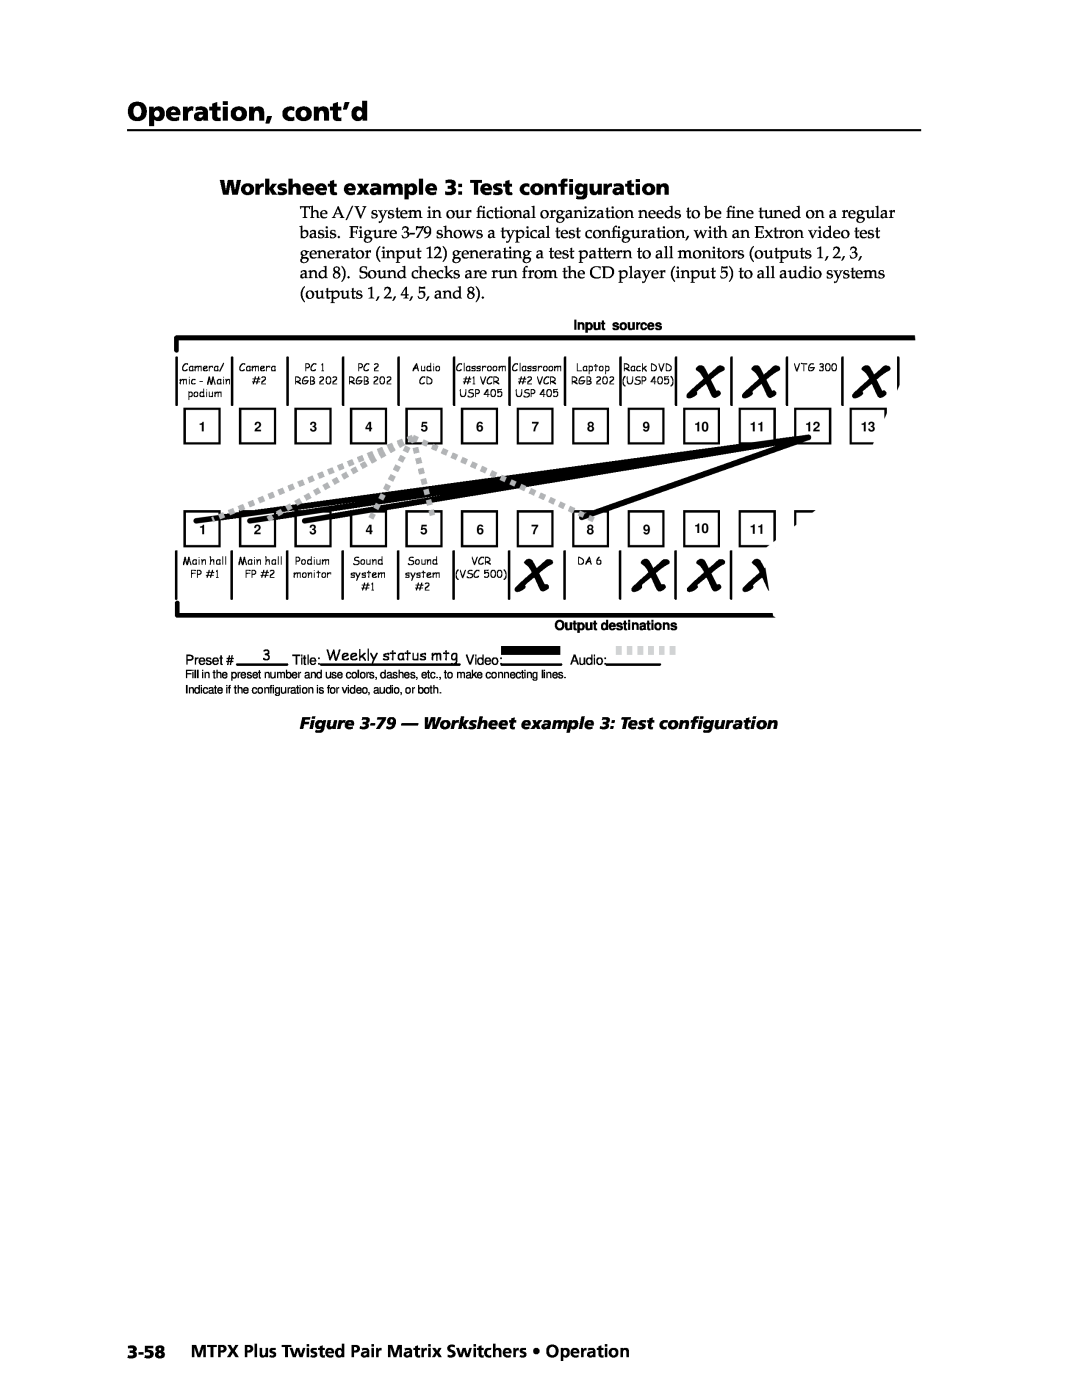 Extron electronic MTPX Plus Series manual Worksheet example 3 Test configuration, Operation, cont’d 